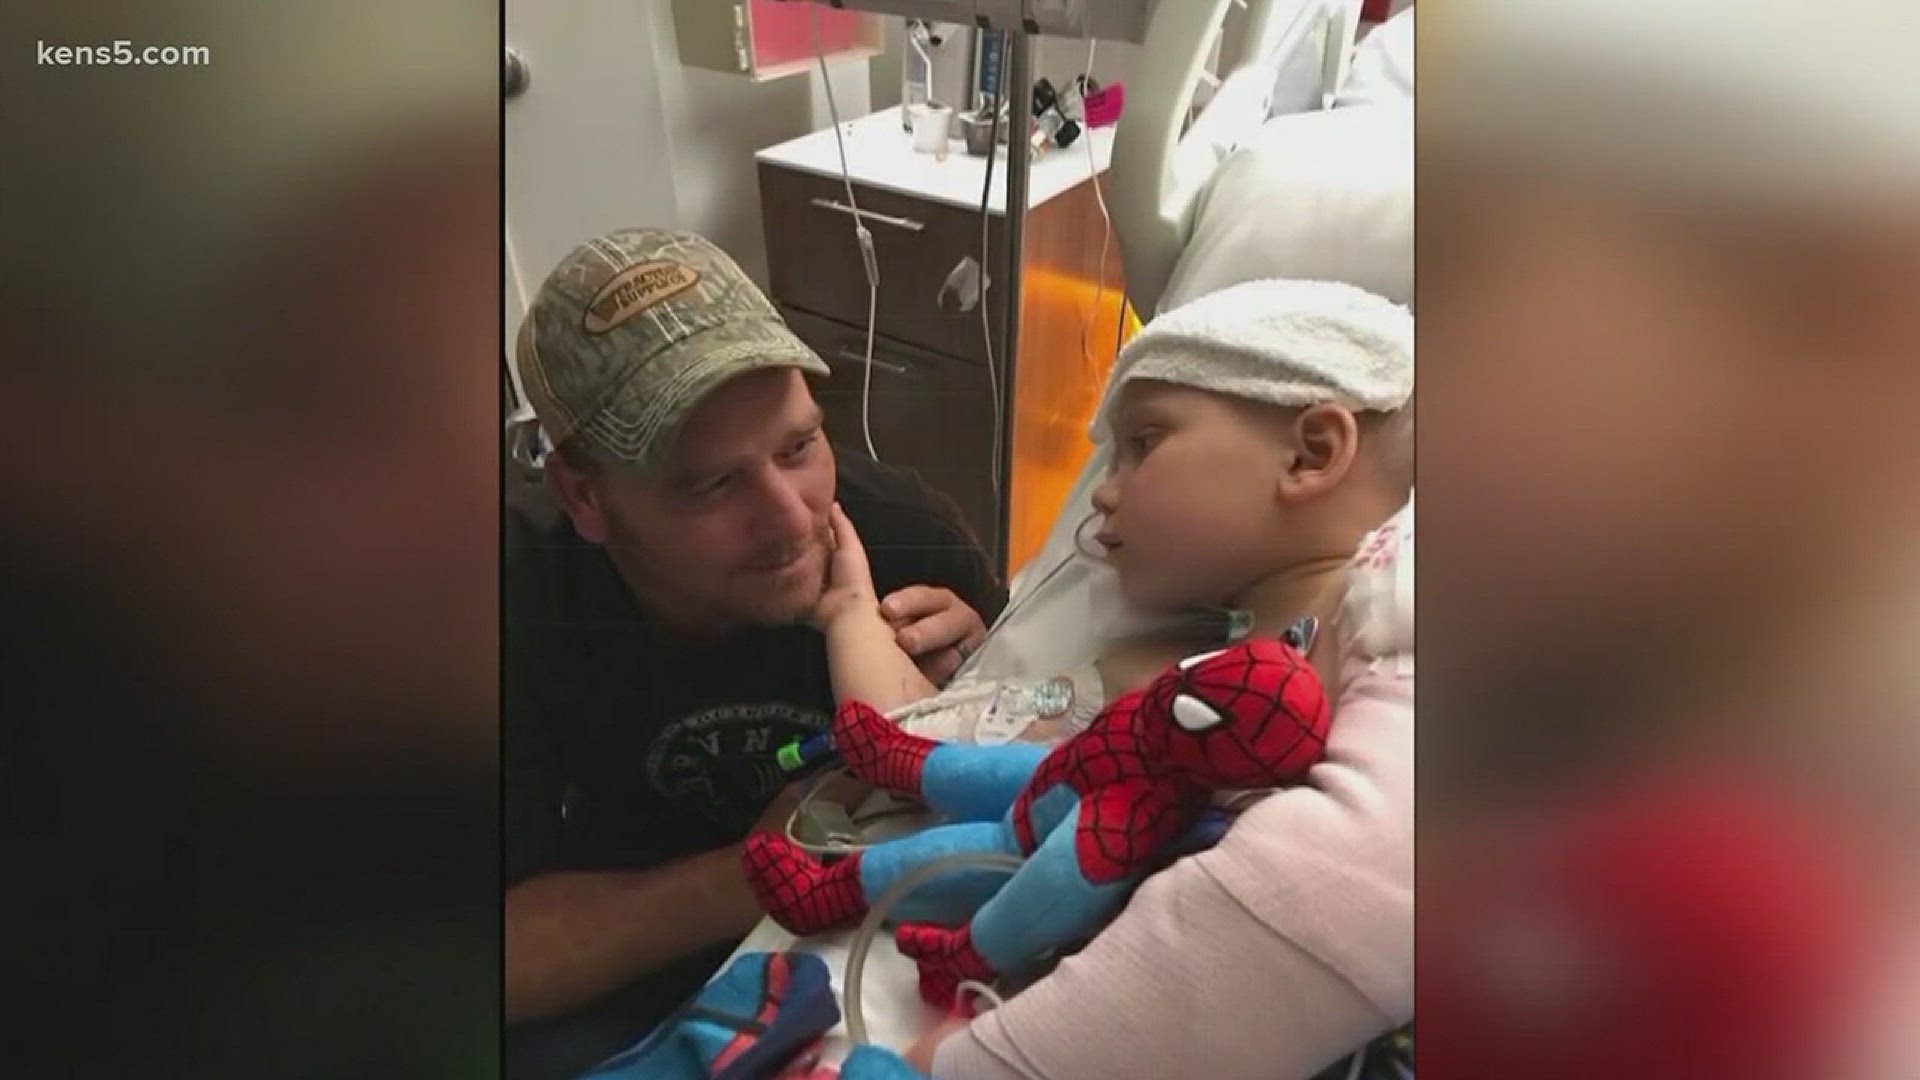 As 5-year-old Sutherland Springs shooting victim Ryland Ward continues to recover in the hospital, the support from around the world has helped him stay positive.